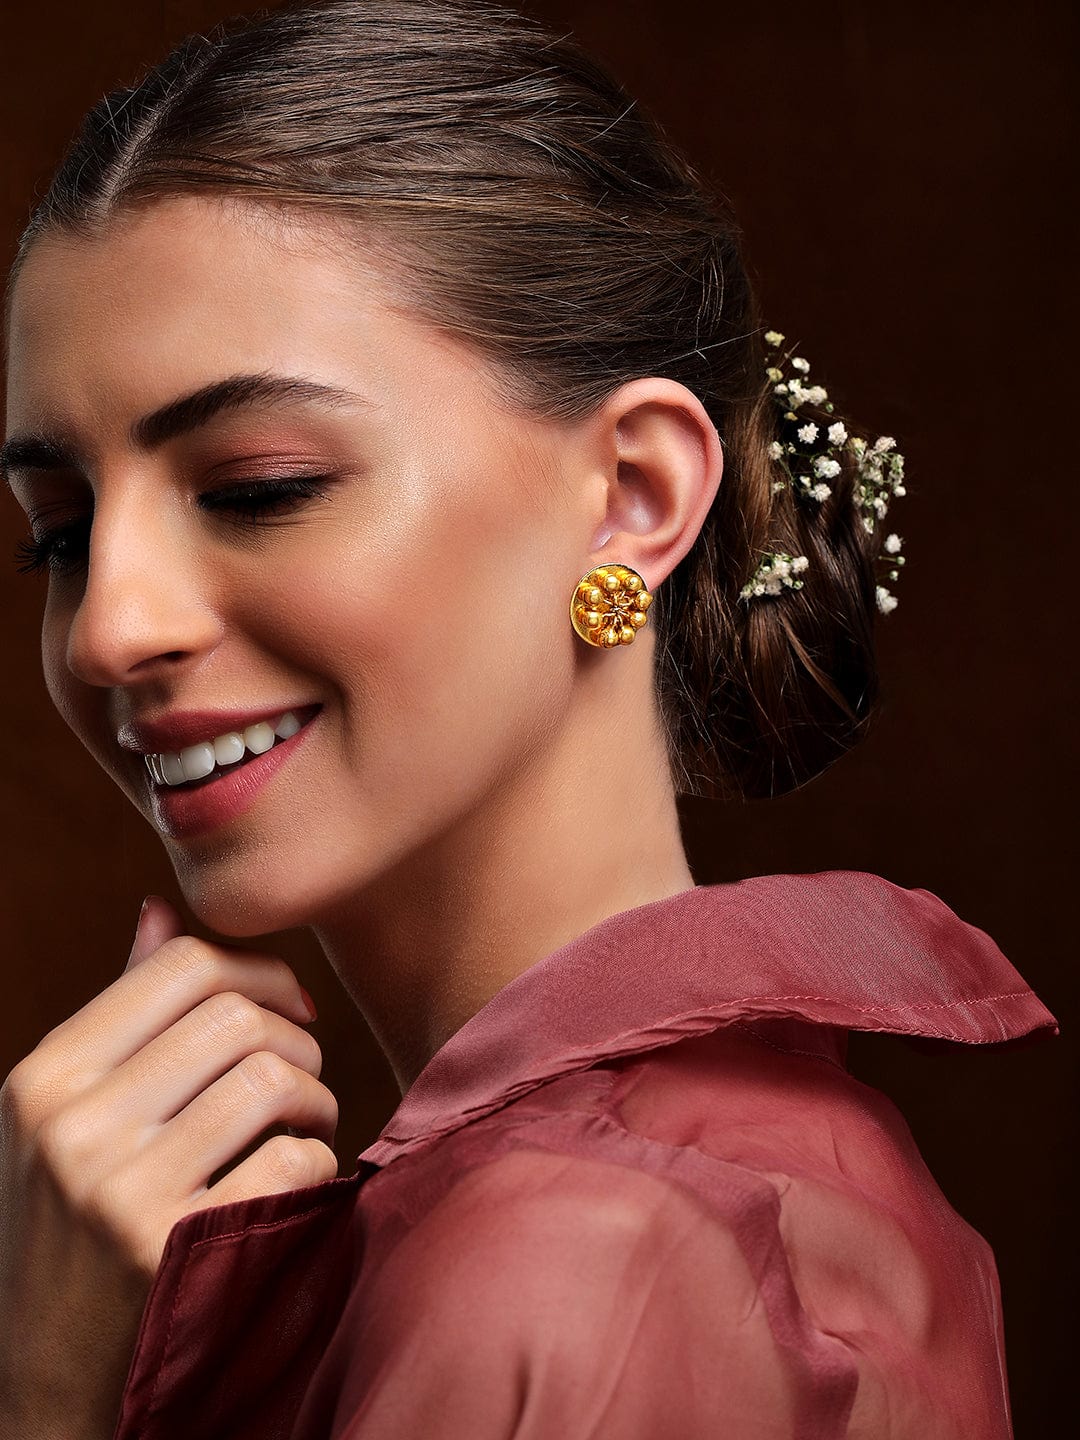 Rubans 24K Gold Plated Stud Earrings With Circular Design And Beads Earrings